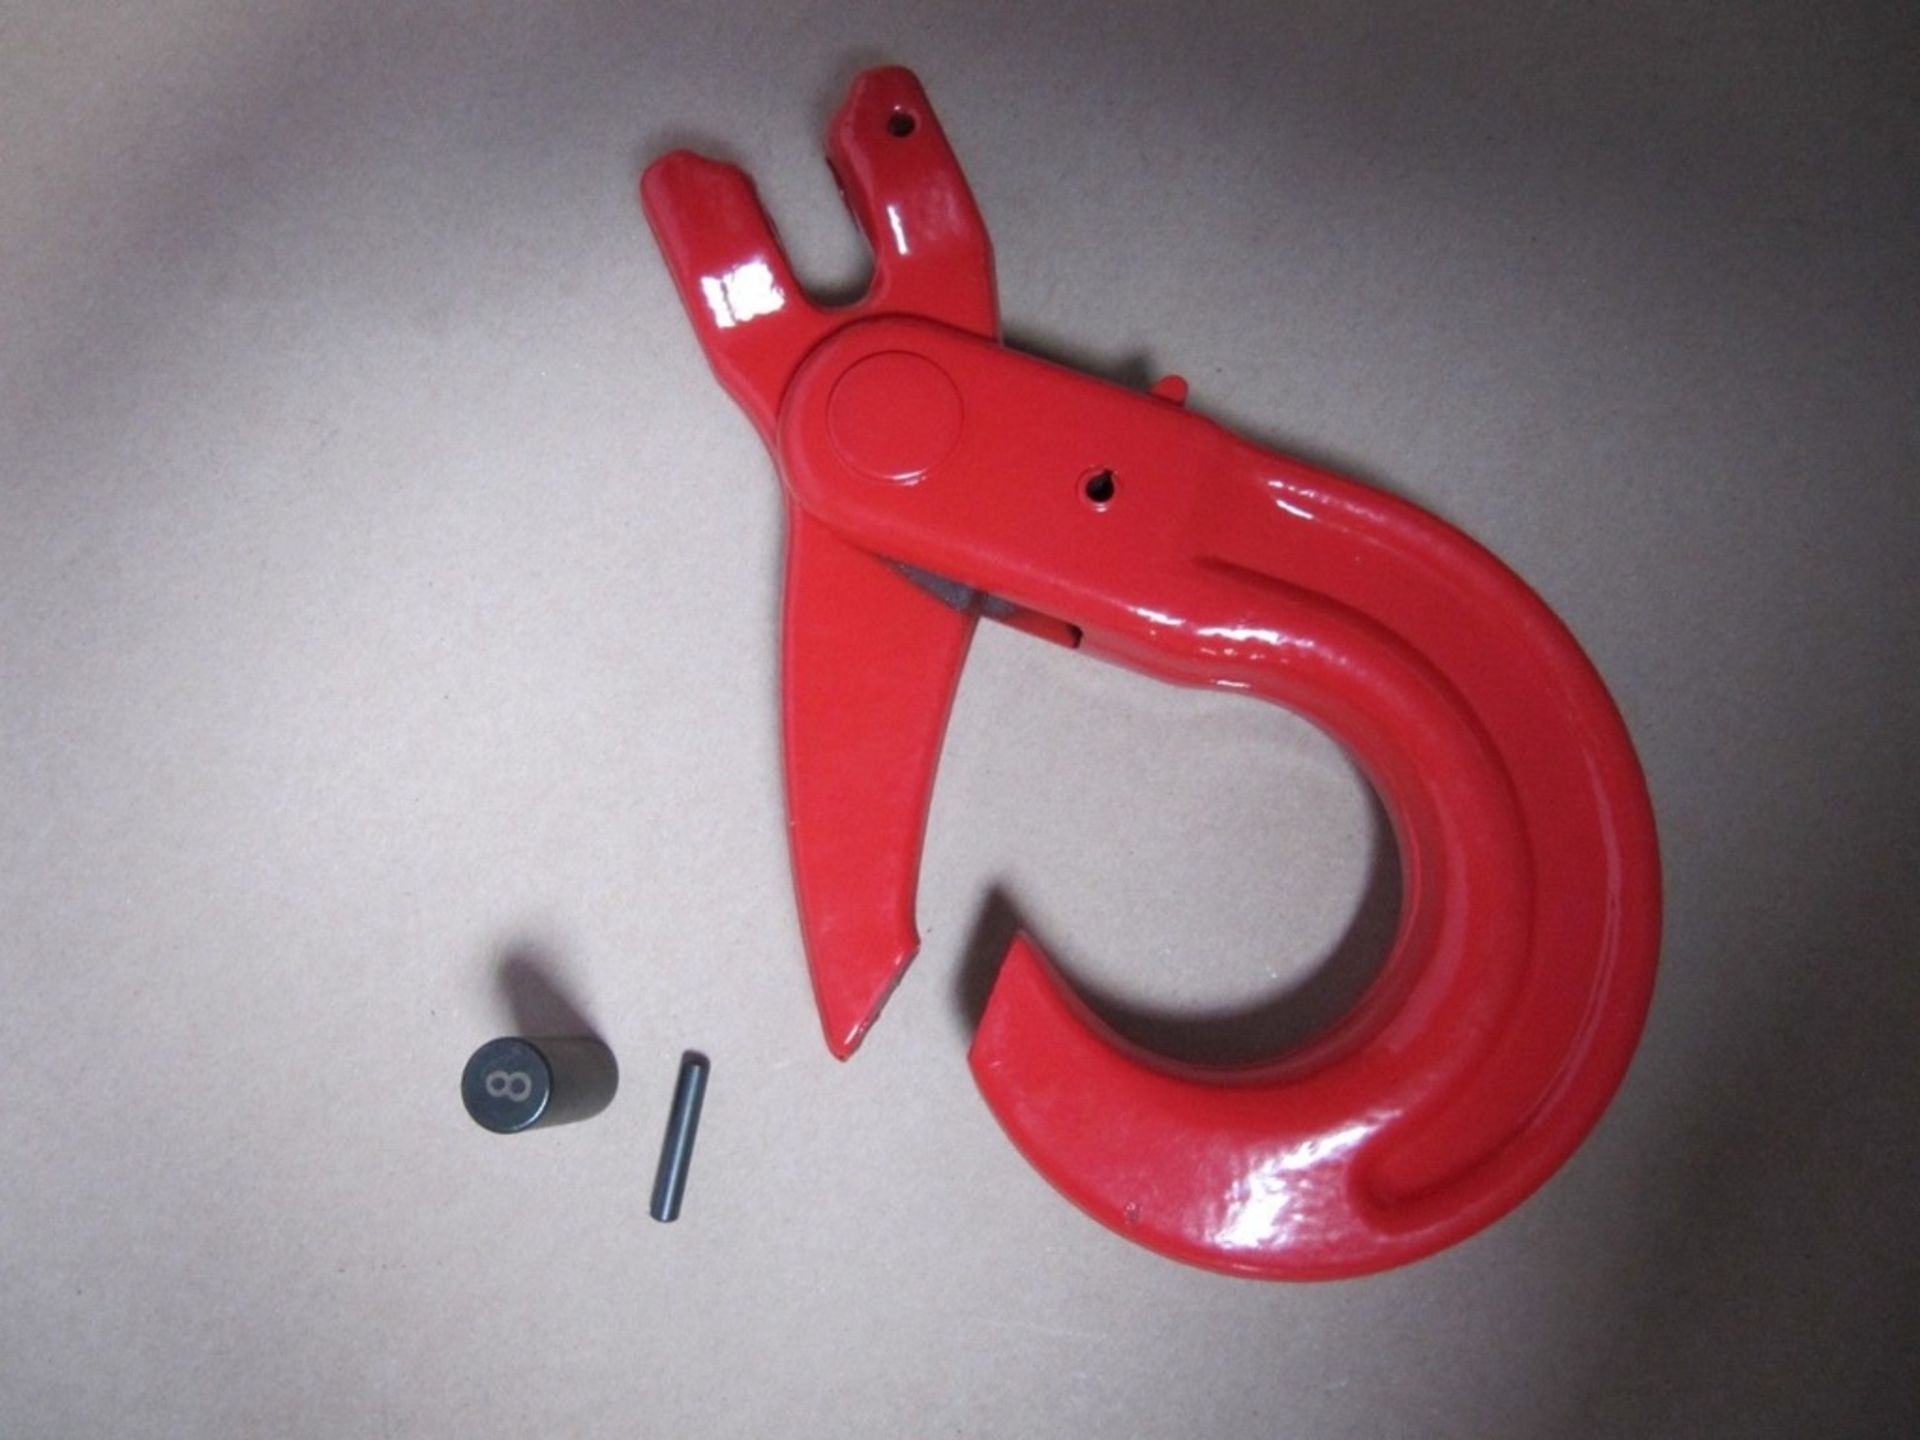 High Security Lifting Hook, Crane Eye Direct Connection G80 5 tonne no vat on hammer.You will get - Image 3 of 4